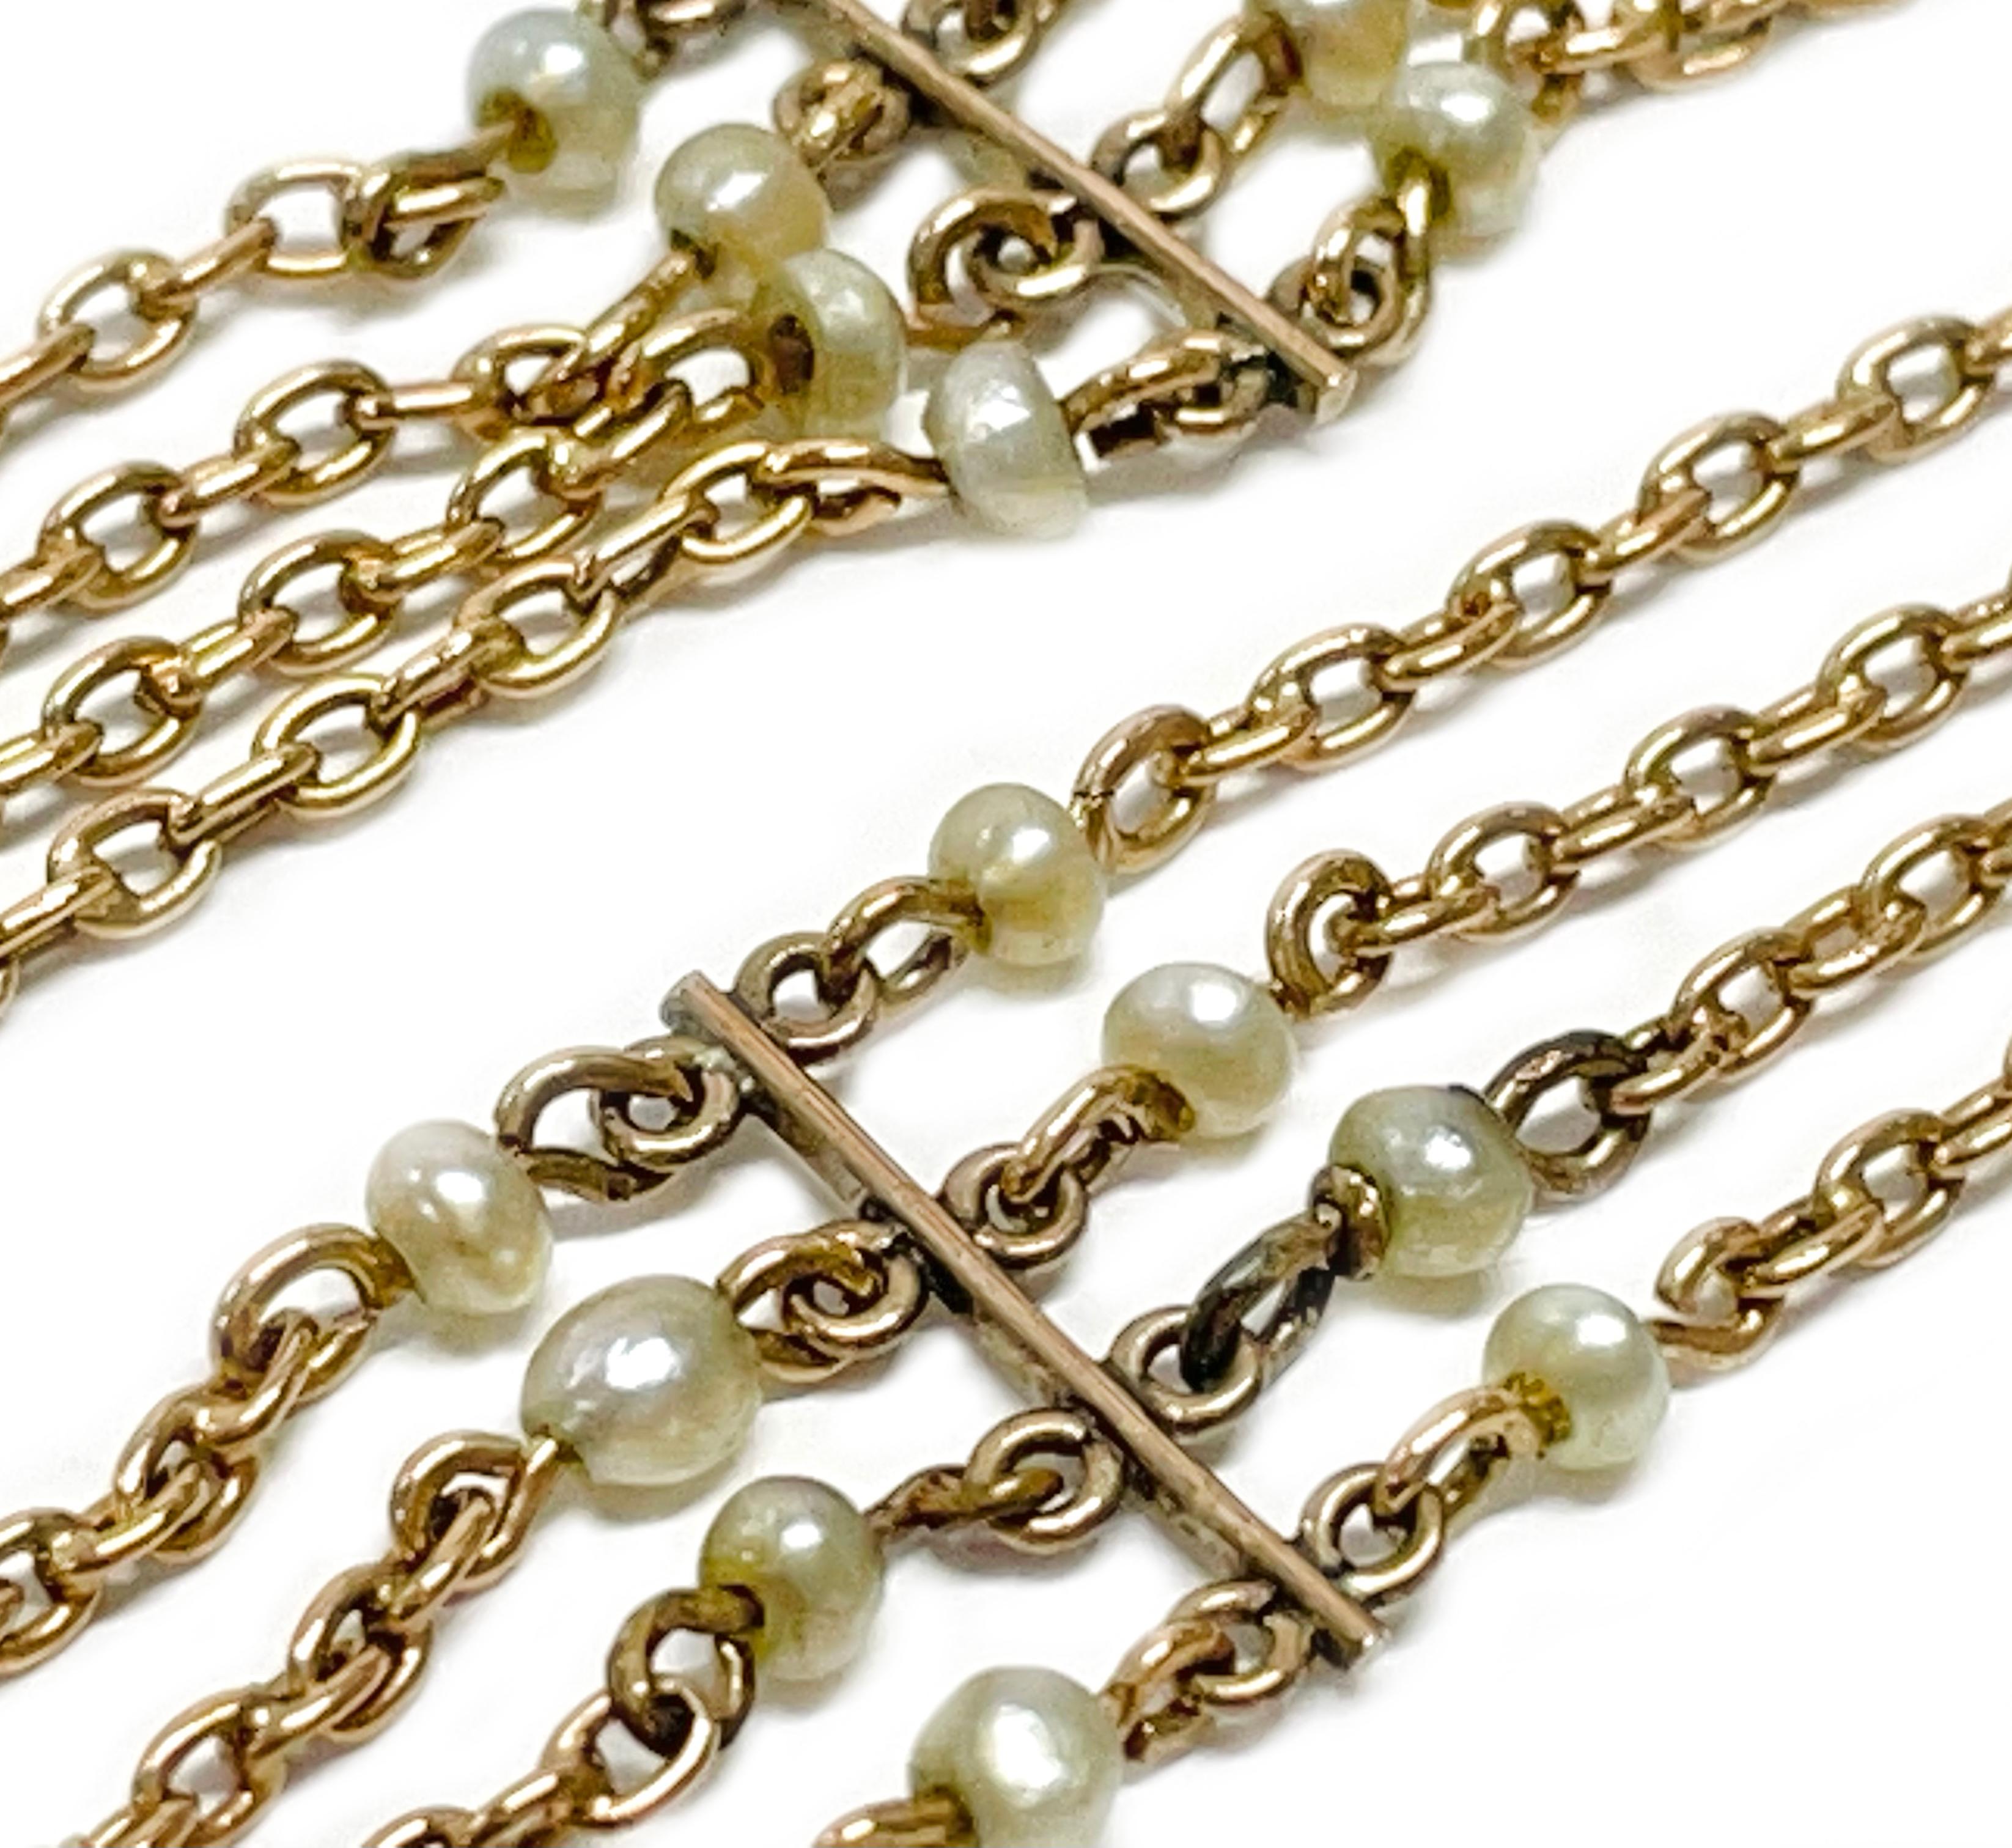 Victorian Four Strand Seed Pearl Necklace. This vintage 18 Karat Rose Gold necklace features four strands of seed pearls. There are twenty-six 2.5mm seed pearls set approximately every 2 1/2